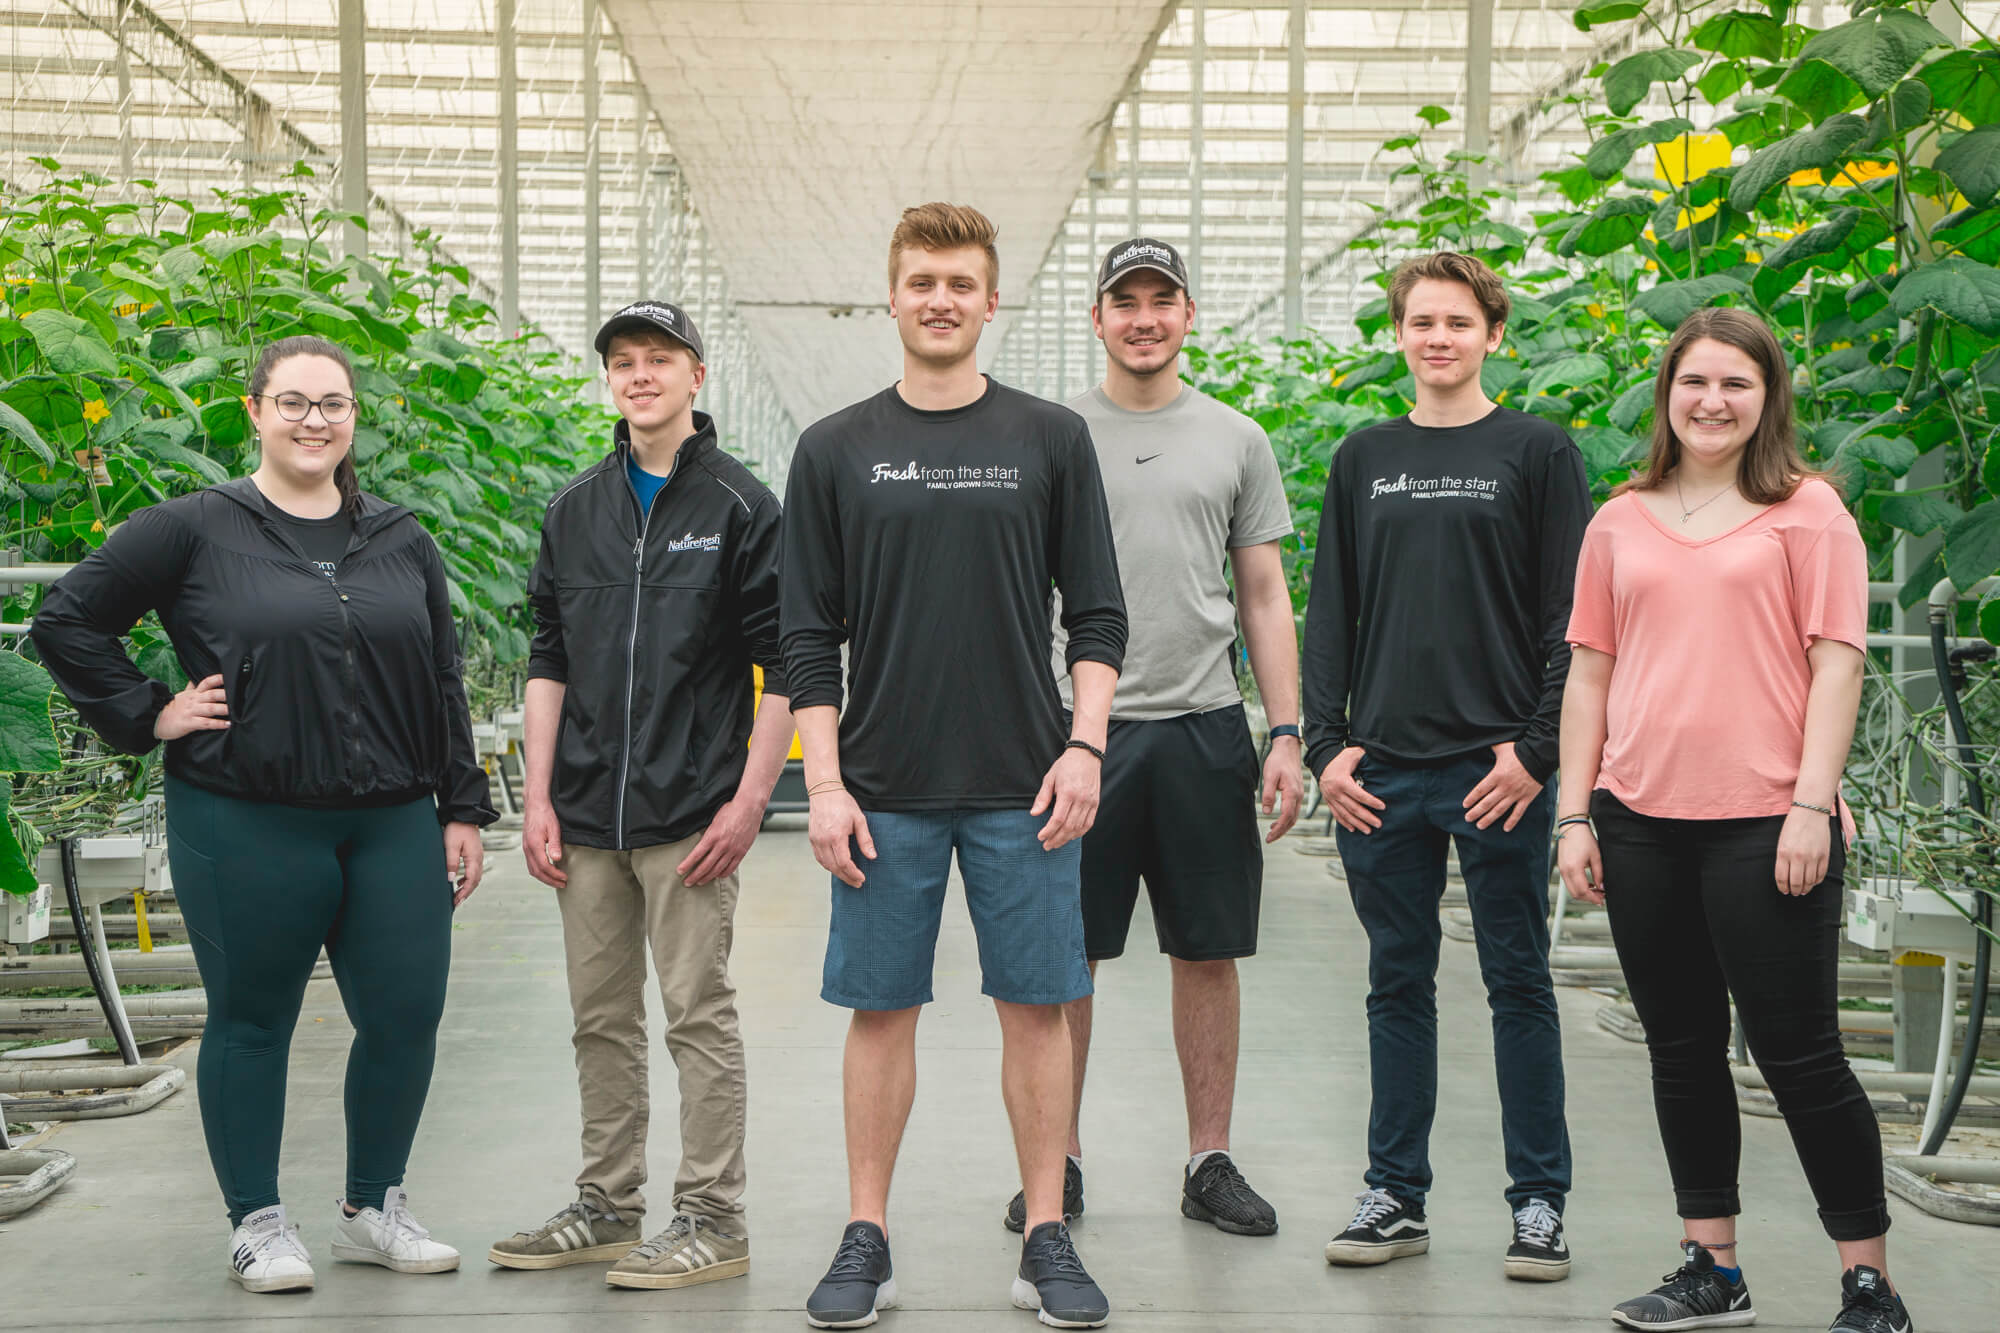 The 2018 GEC team standing in the middle of our cucumber greenhouse